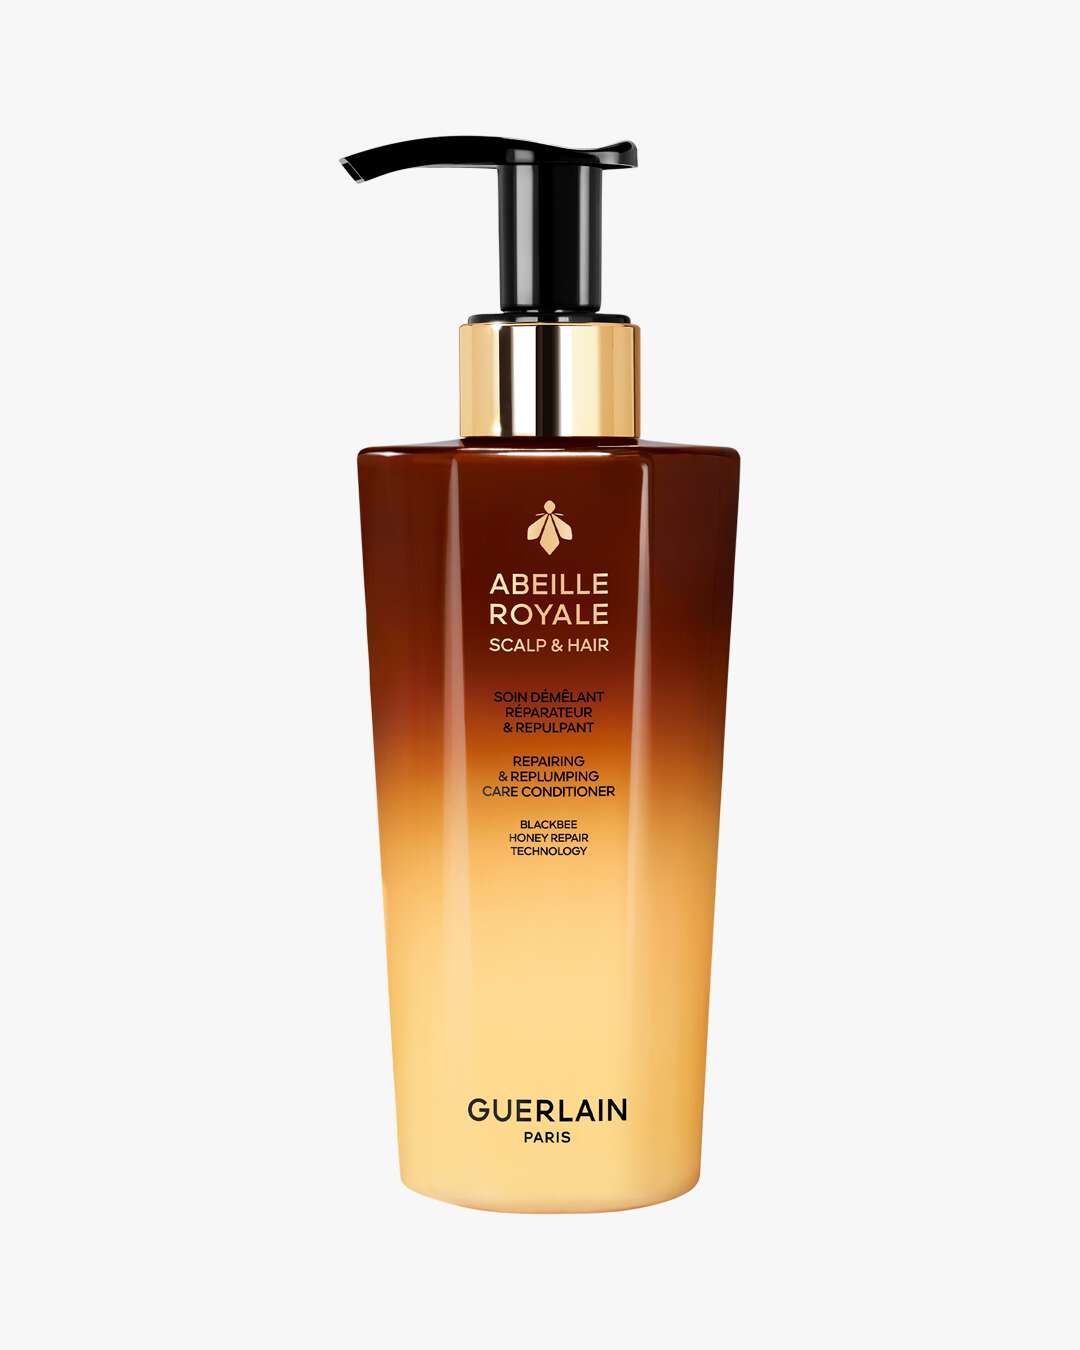 Abeille Royale Repairing & Replumping Care Conditioner 290 ml